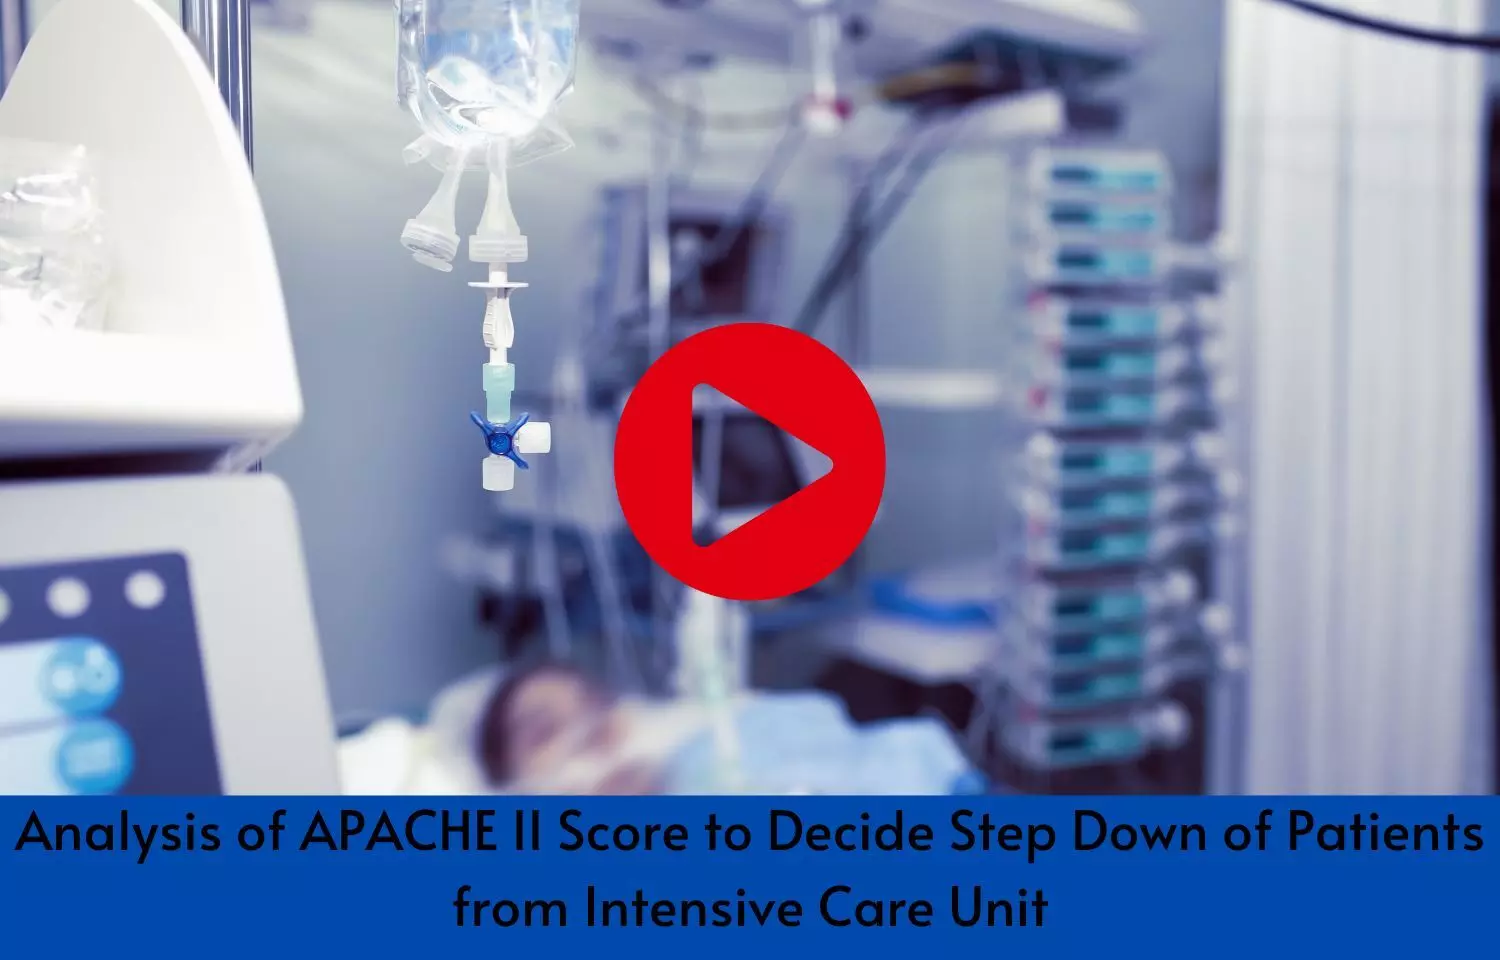 Analysis of APACHE II Score to Decide Step Down of Patients from Intensive Care Unit